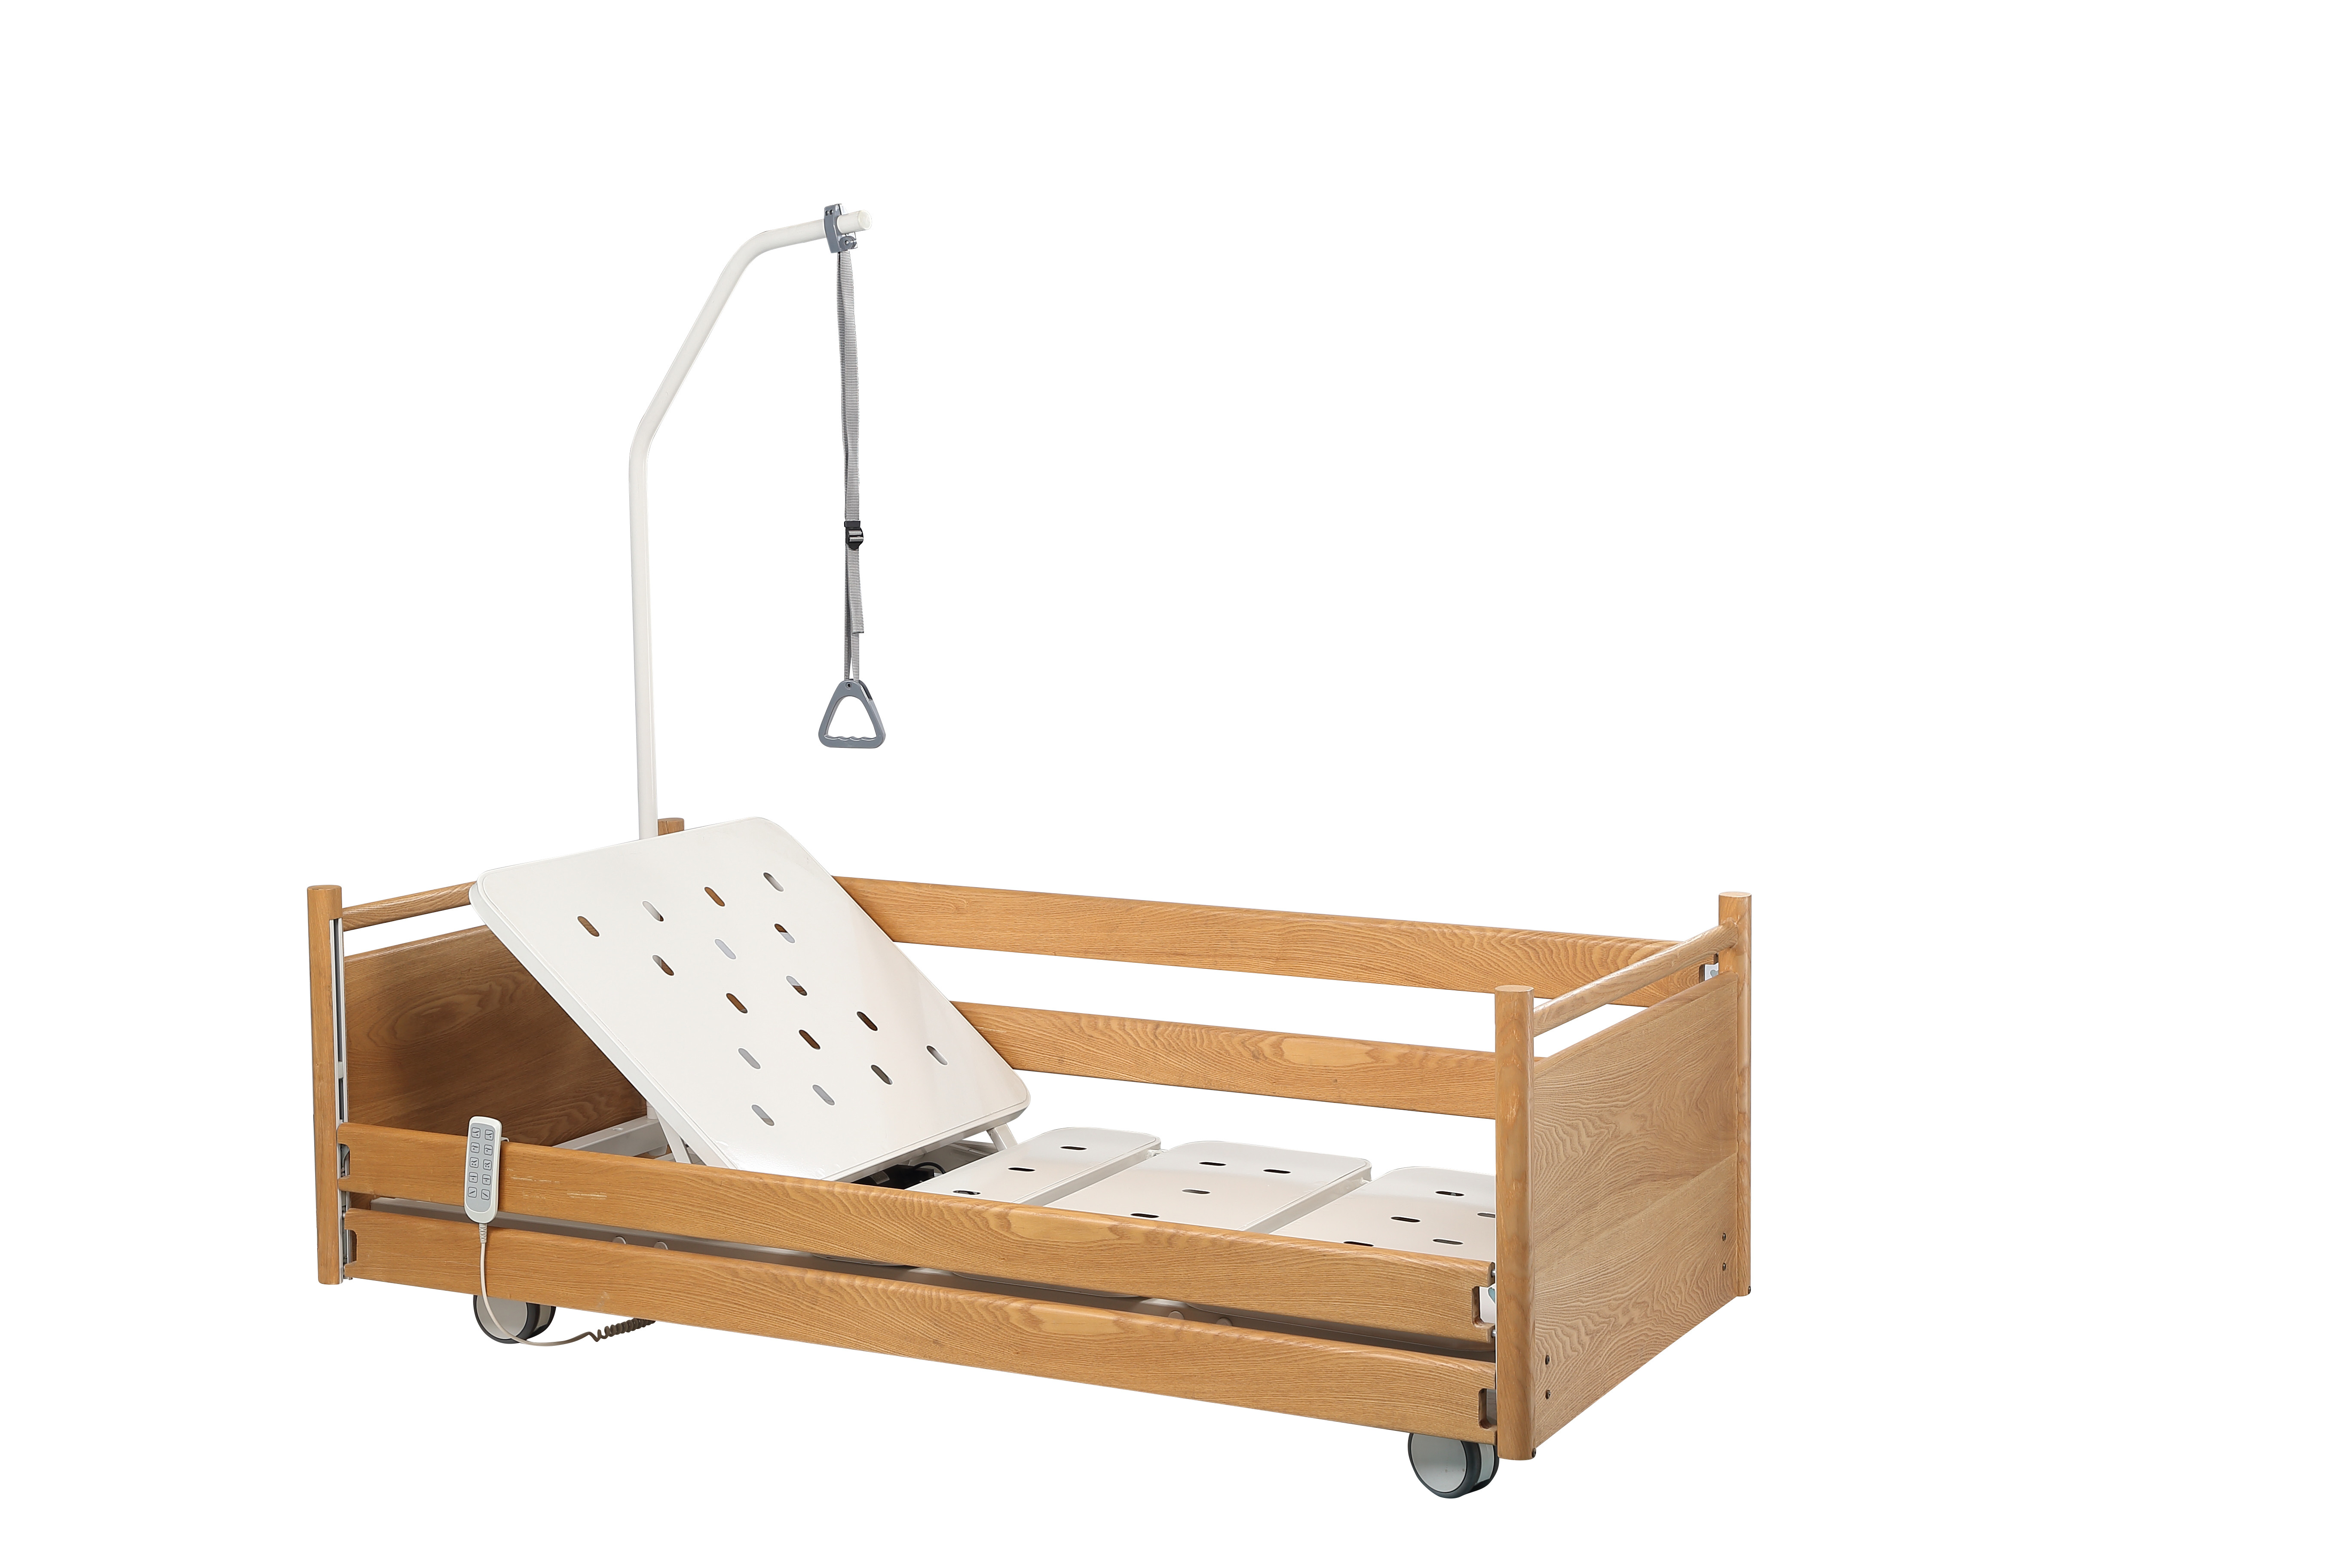 Wholesale 2190 * 970 * 300 - 760mm Home Care Bed For Paralysis Patient Wooden Handrails from china suppliers